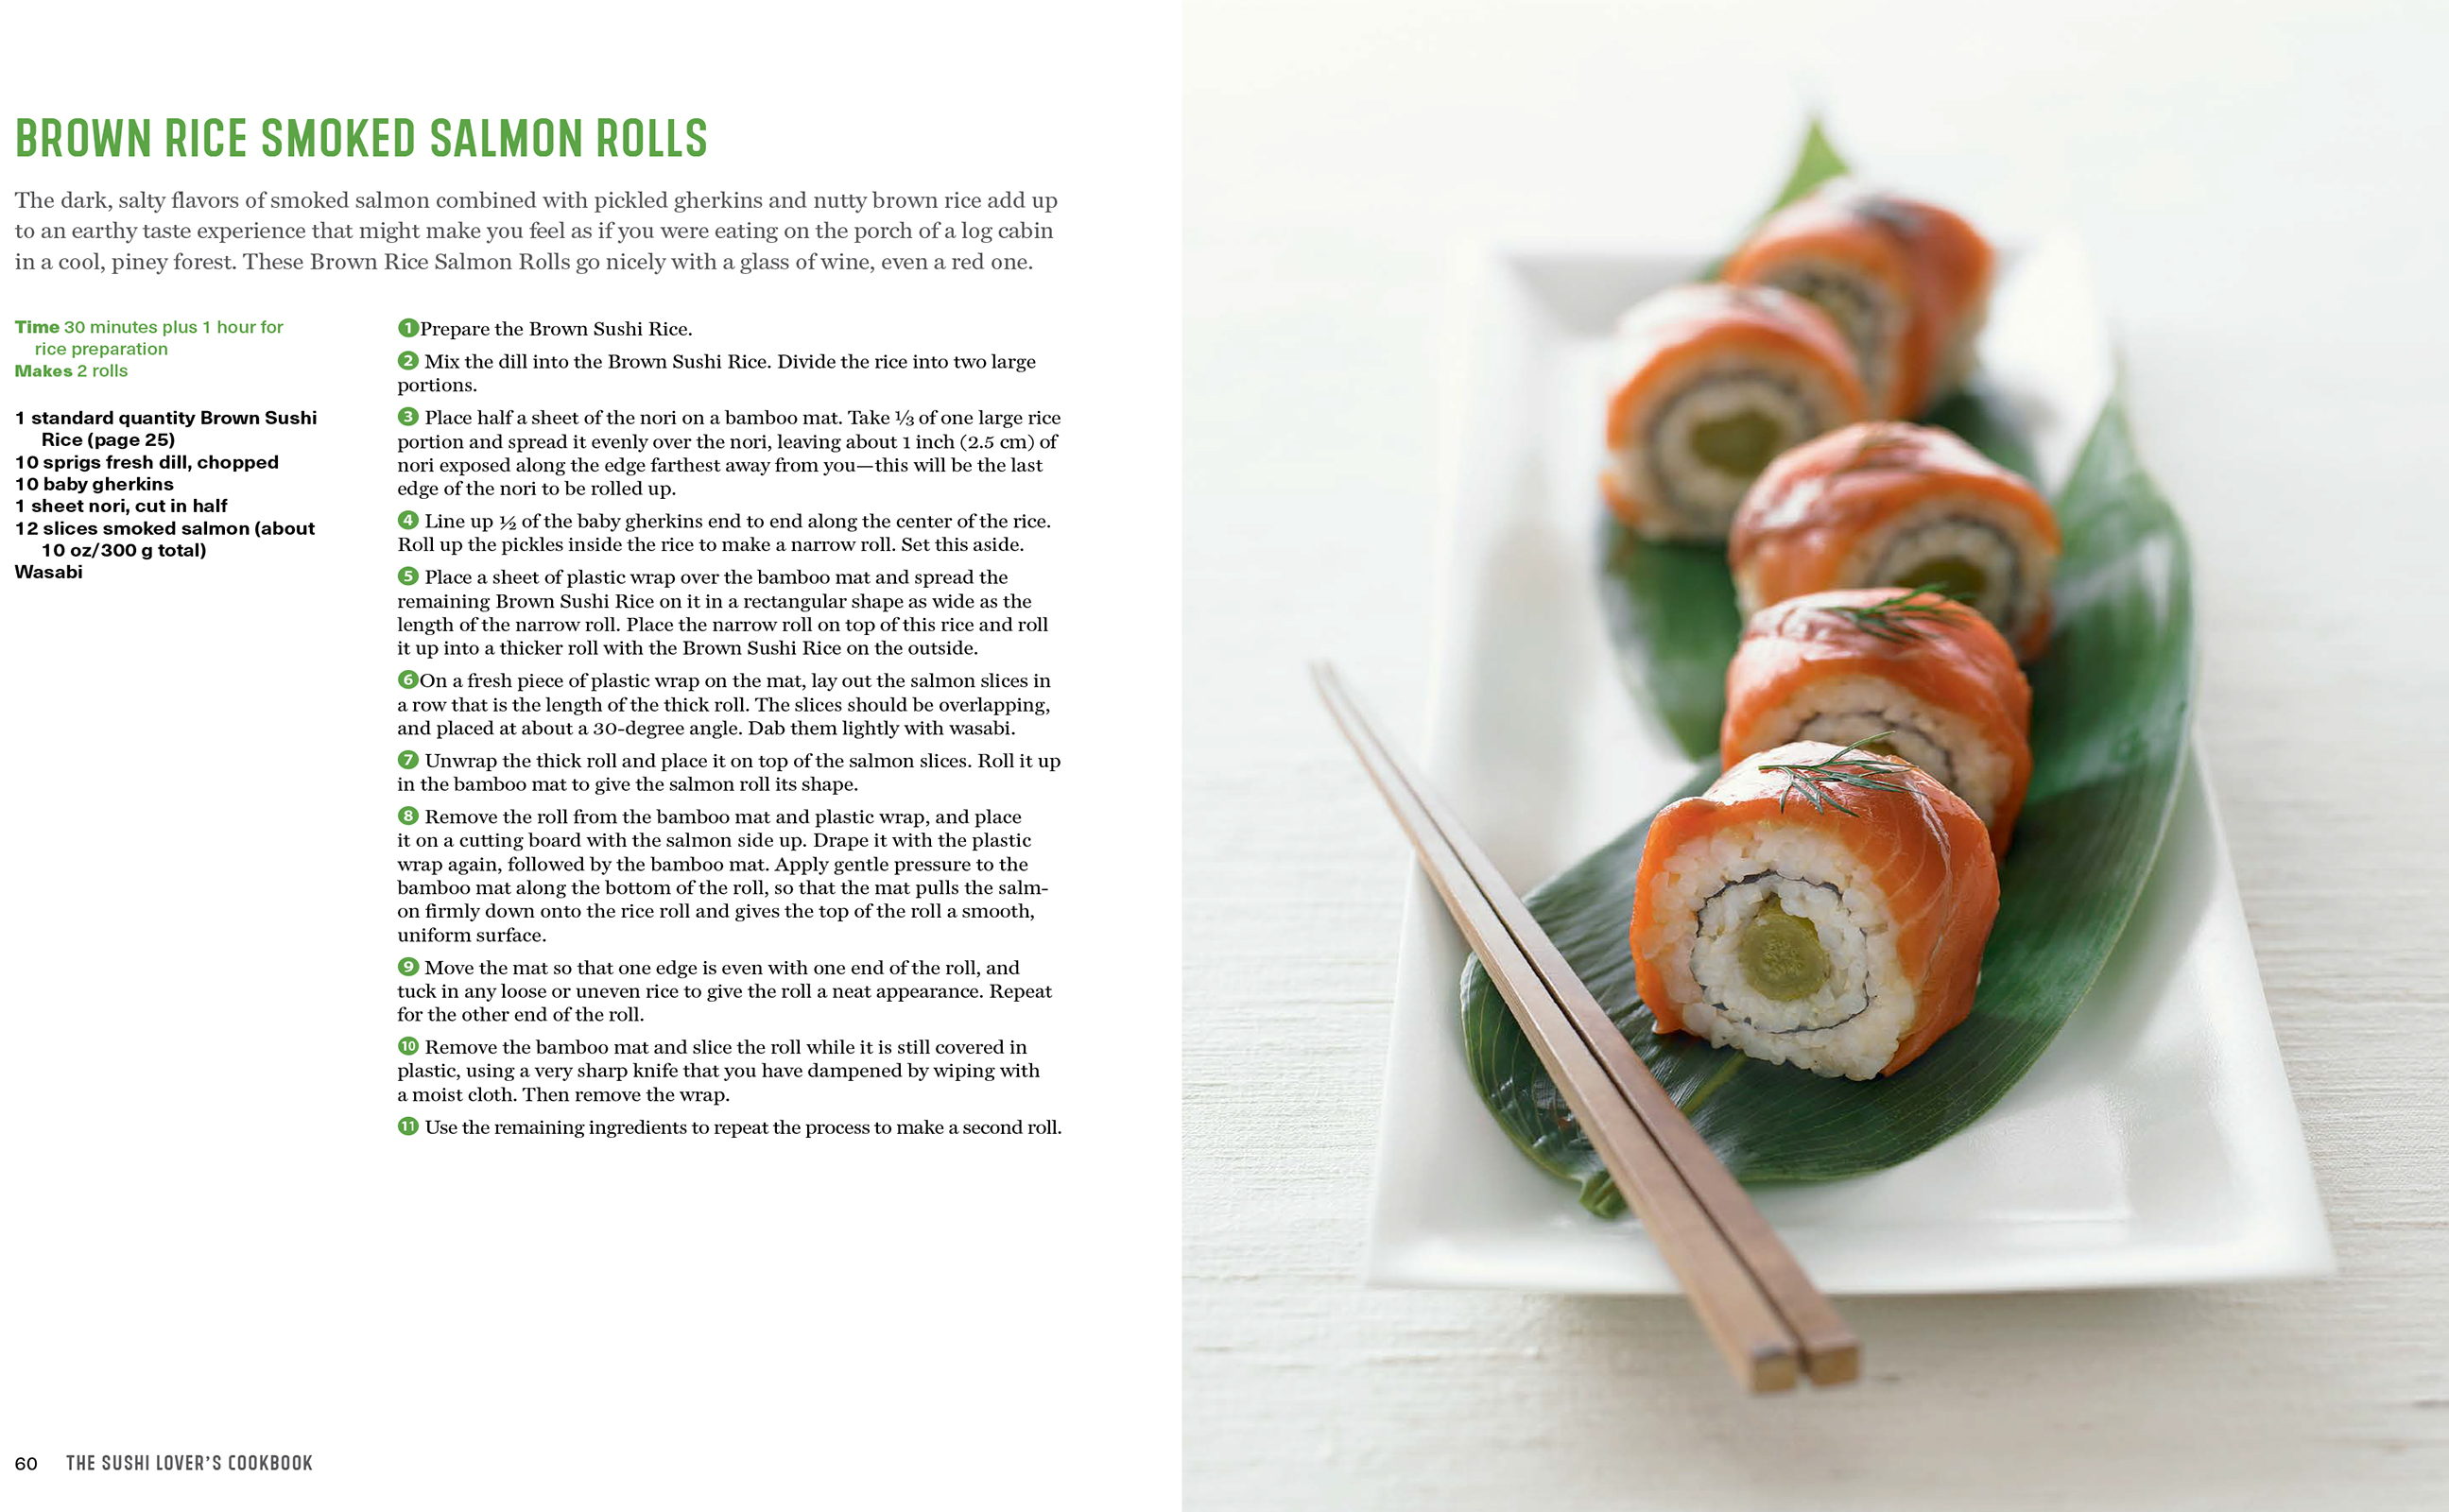 The Sushi Lover's Cookbook